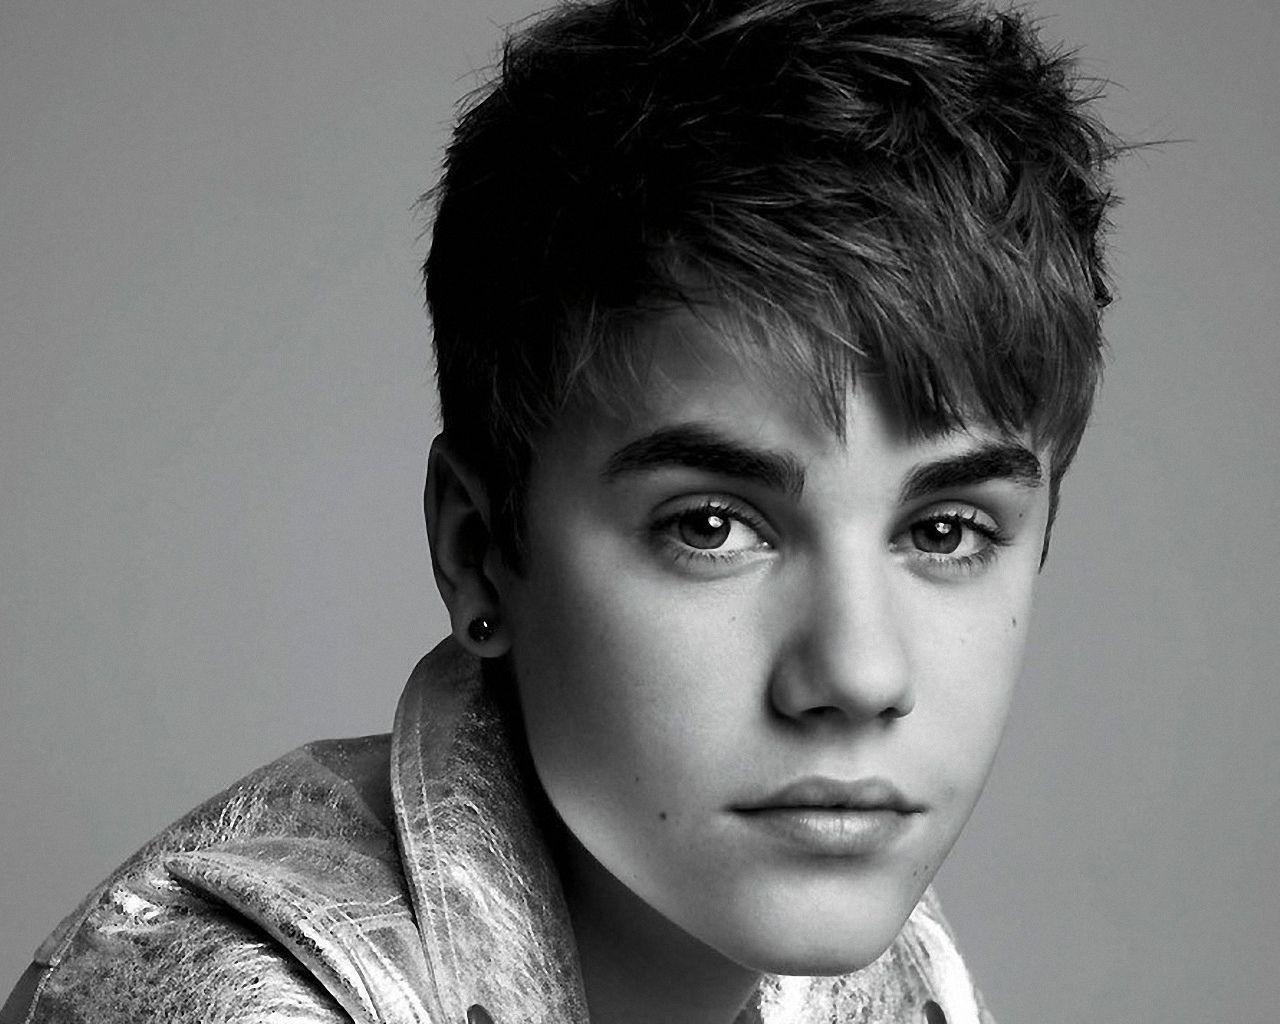 image For > Justin Bieber Tumblr Black And White Smiling